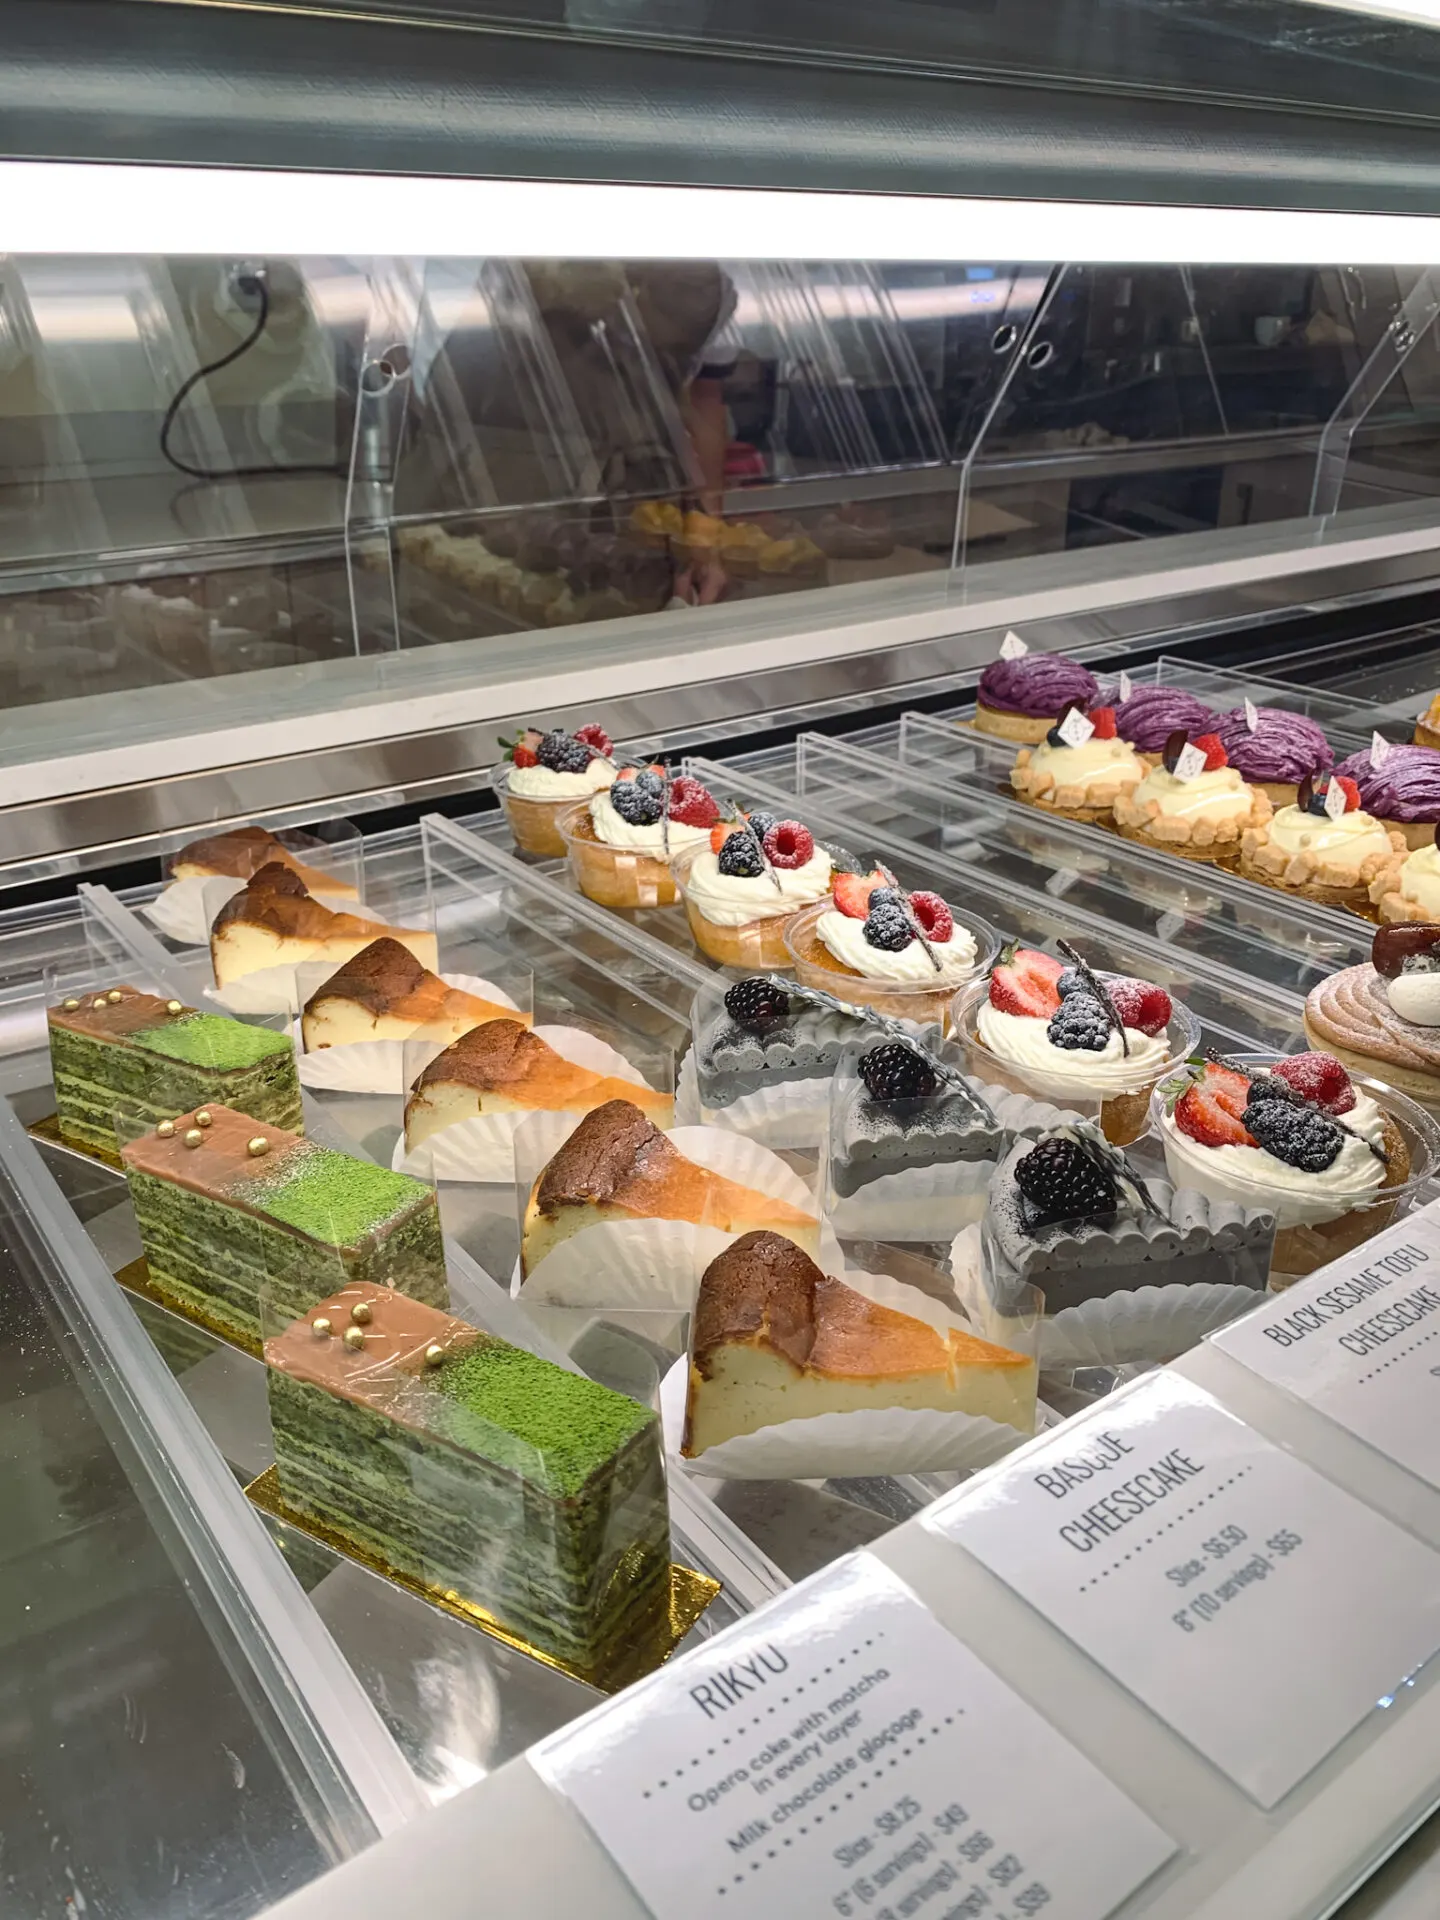 Pastries from Yuzu No Ki Cafe & Patisserie at J-Town Shopping Centre in Markham, Ontario